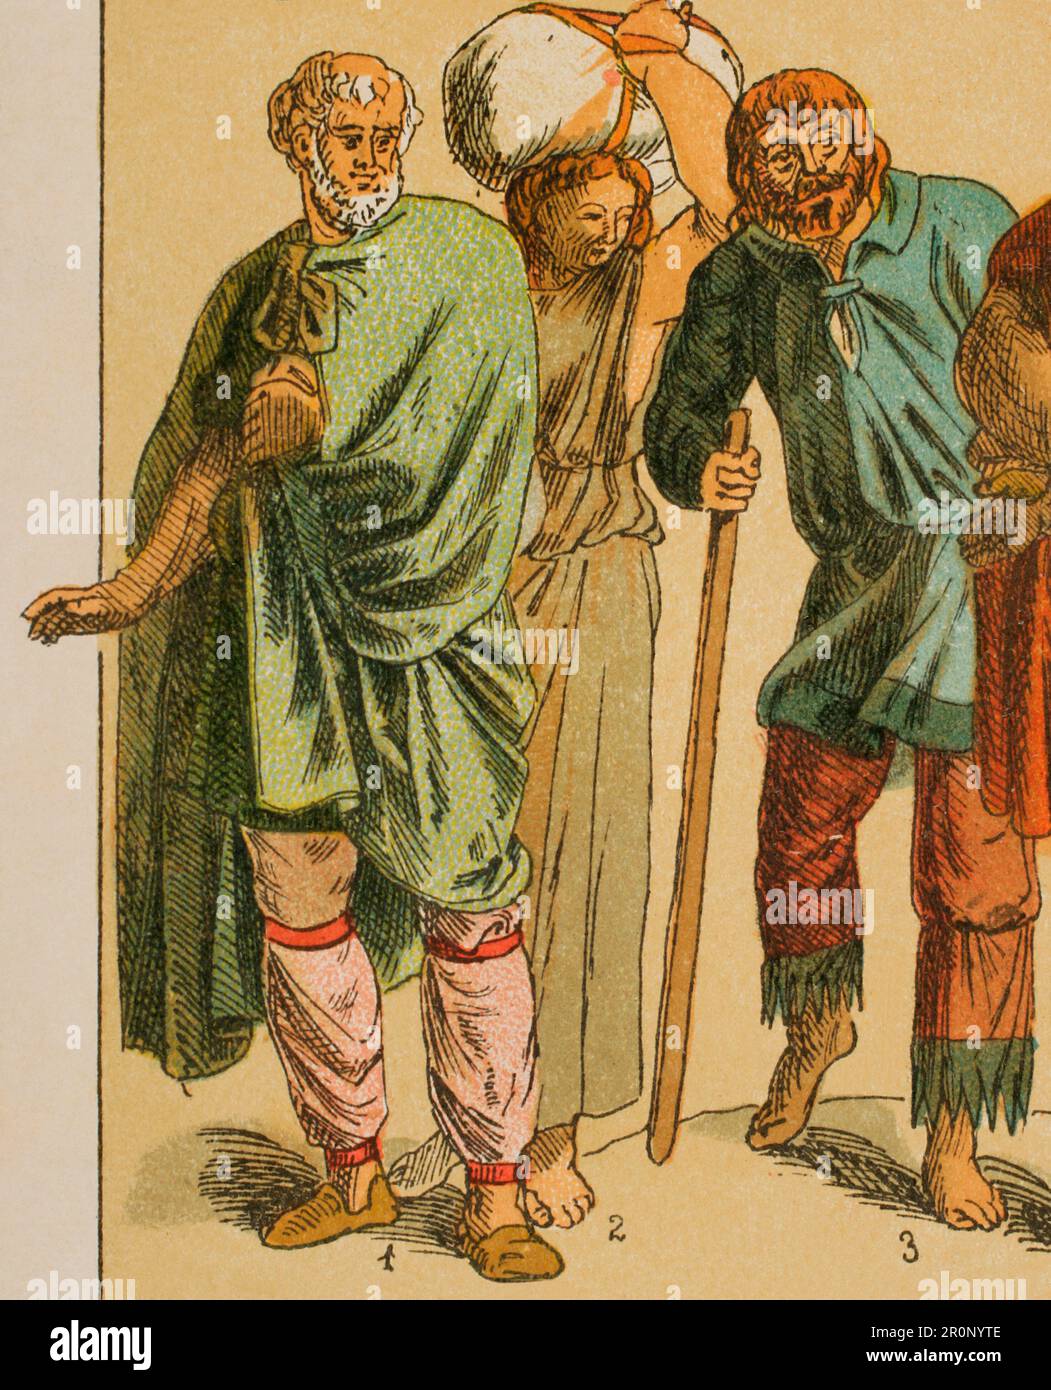 Germanic peoples. Goths. From left to right: 1- Eastern Goth costume, 2- Female Goth dress, 3- Eastern Goth costume. Chromolithography. 'Historia Universal', by César Cantú. Volume III, 1882. Stock Photo